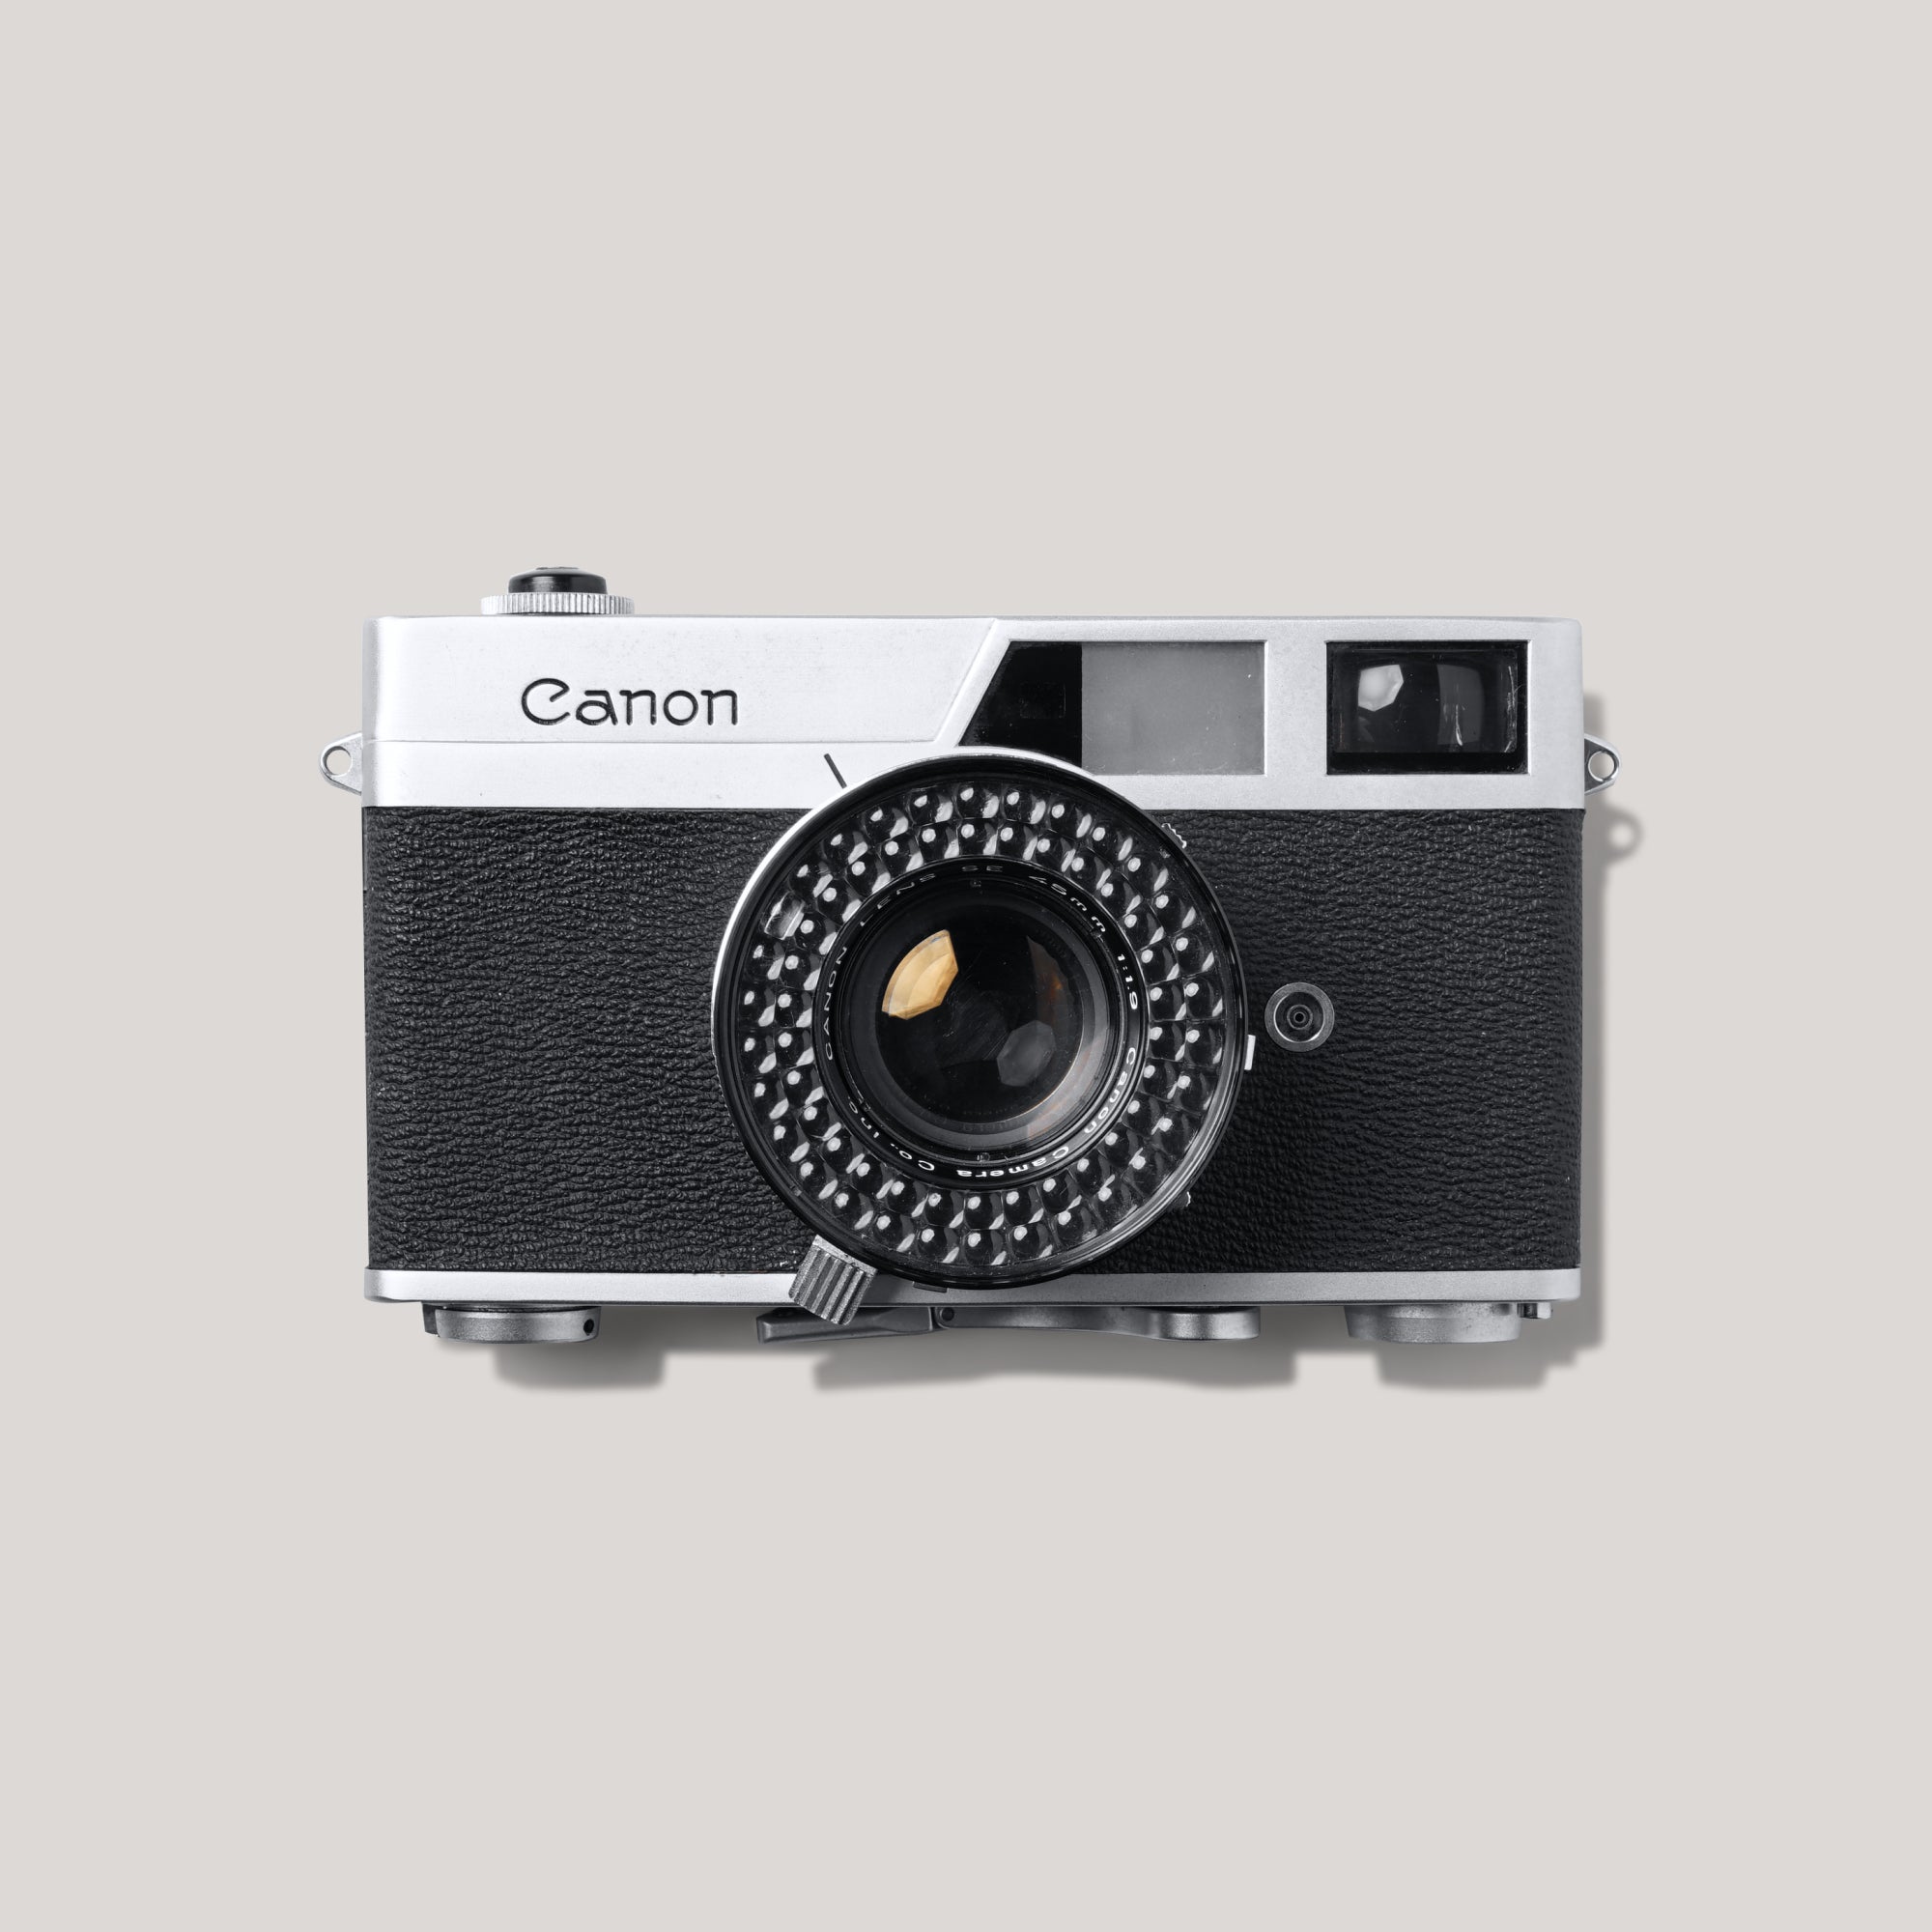 Buy Canon Canonet now at Analogue Amsterdam